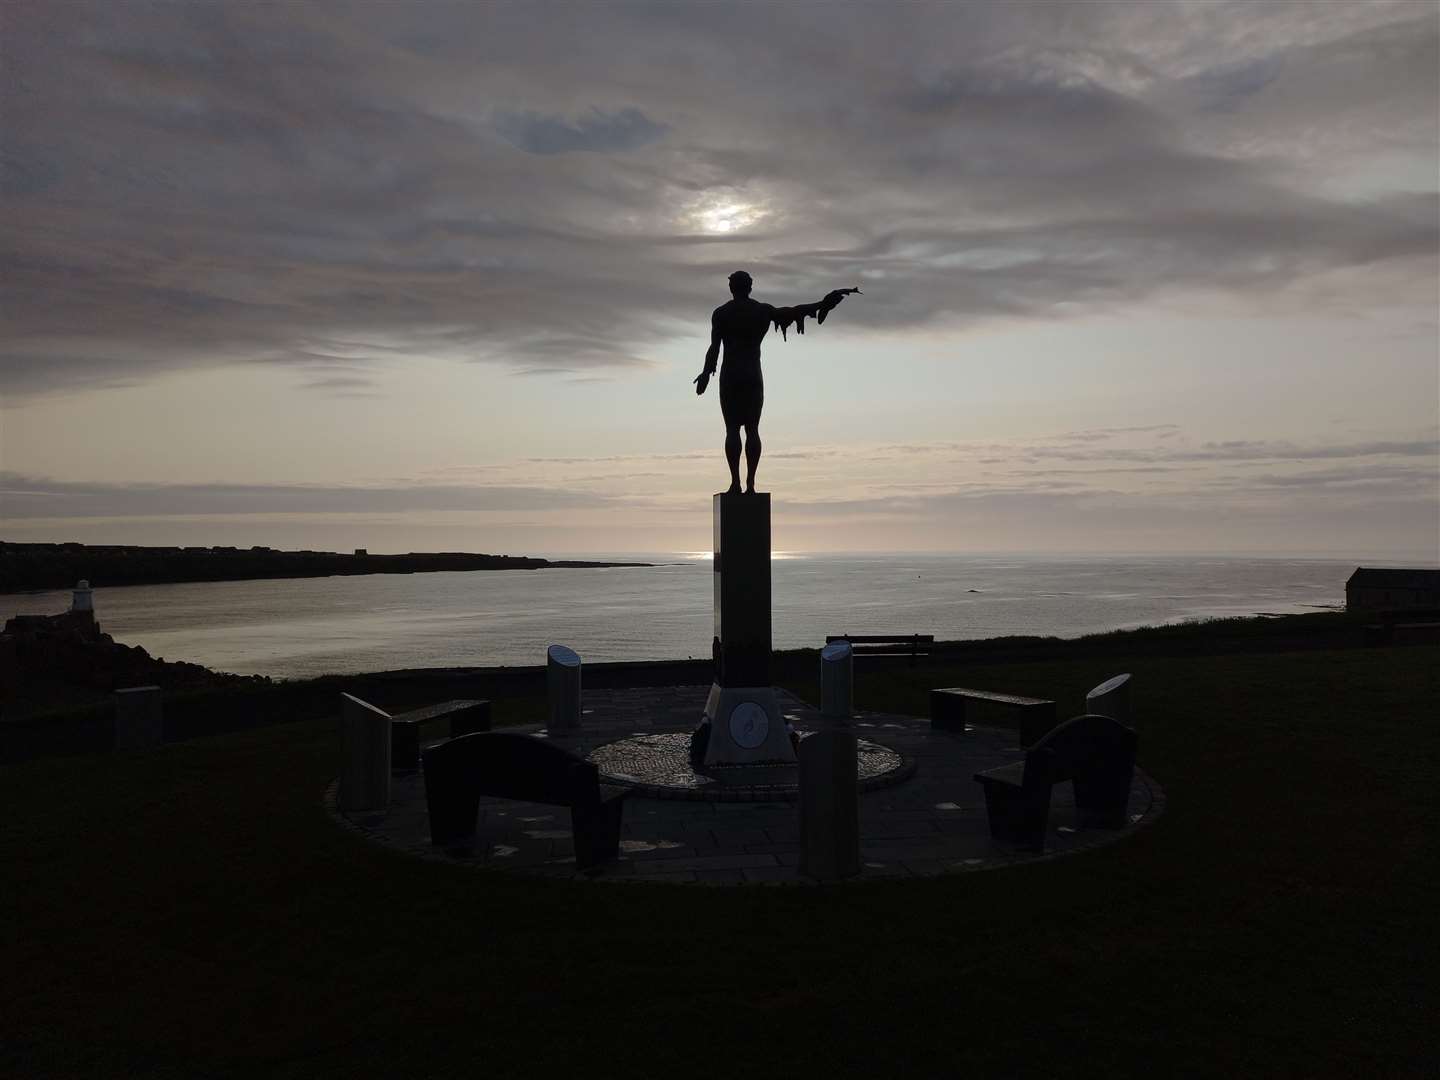 Matthew Towe sent this image of the Seafarers Memorial in Wick on a calm morning.